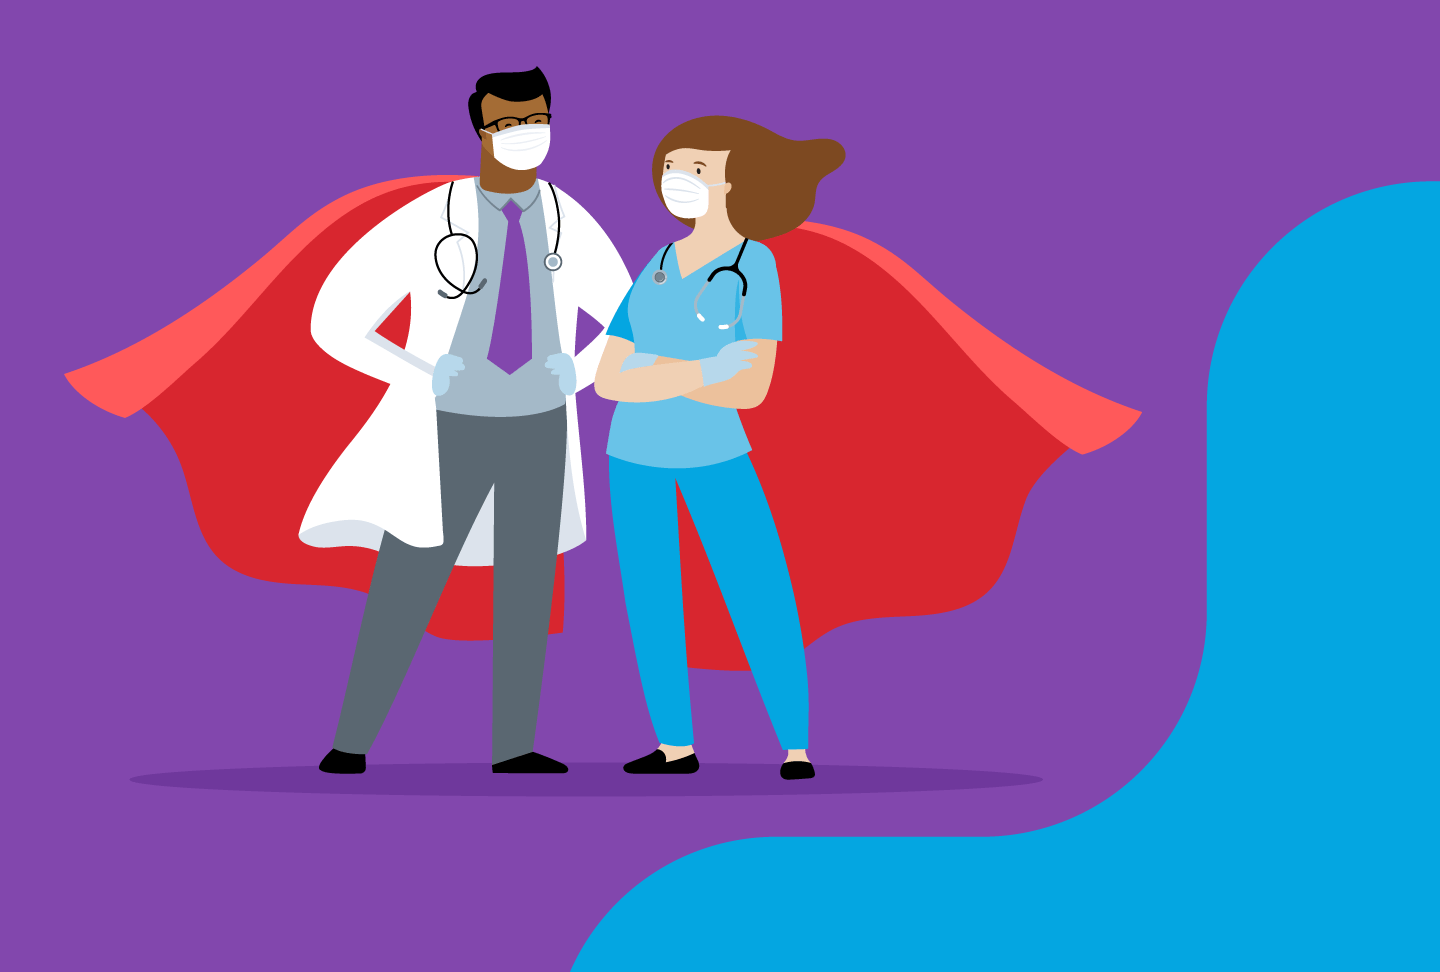 Illustration of two healthcare providers with masks and superhero capes